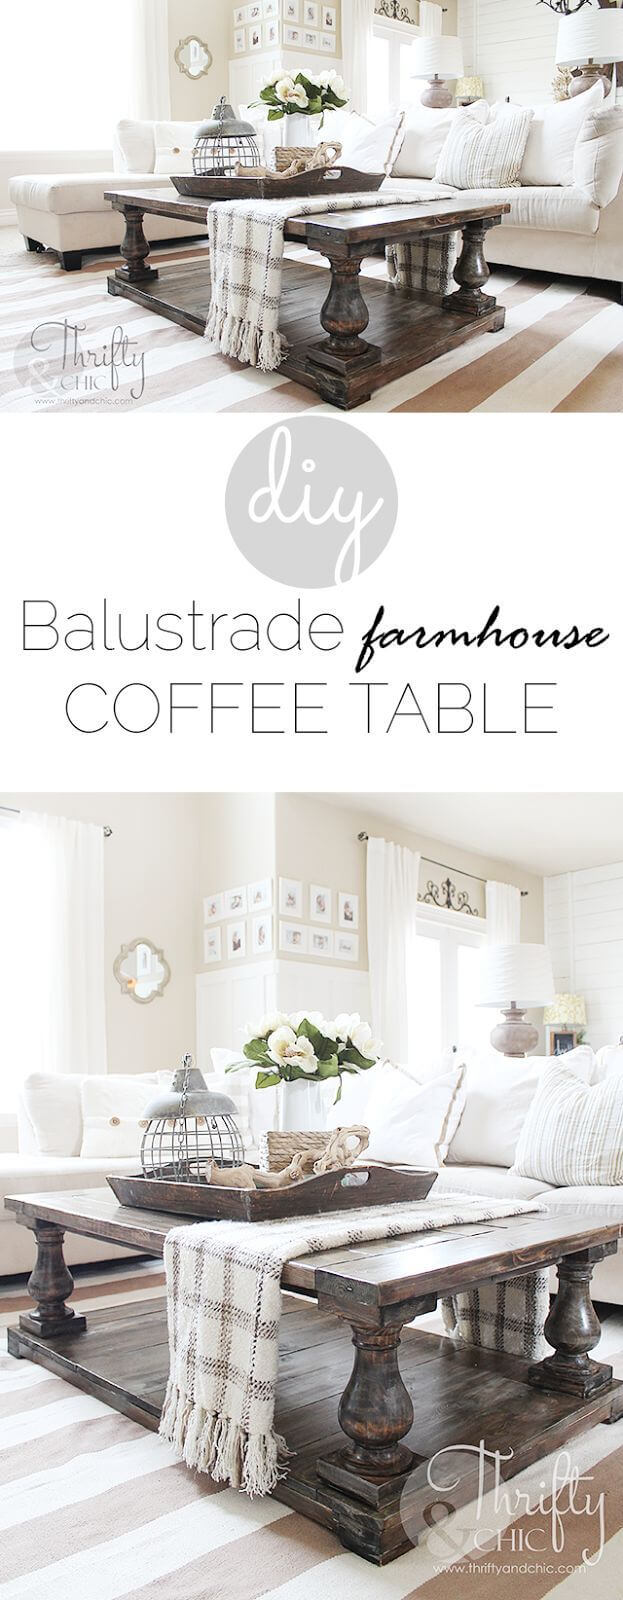 best diy farmhouse coffee table ideas and designs for homebnc end decor big bold balustrade centerpiece heritage side dimensions pulaski bedroom furniture whalen ers low set